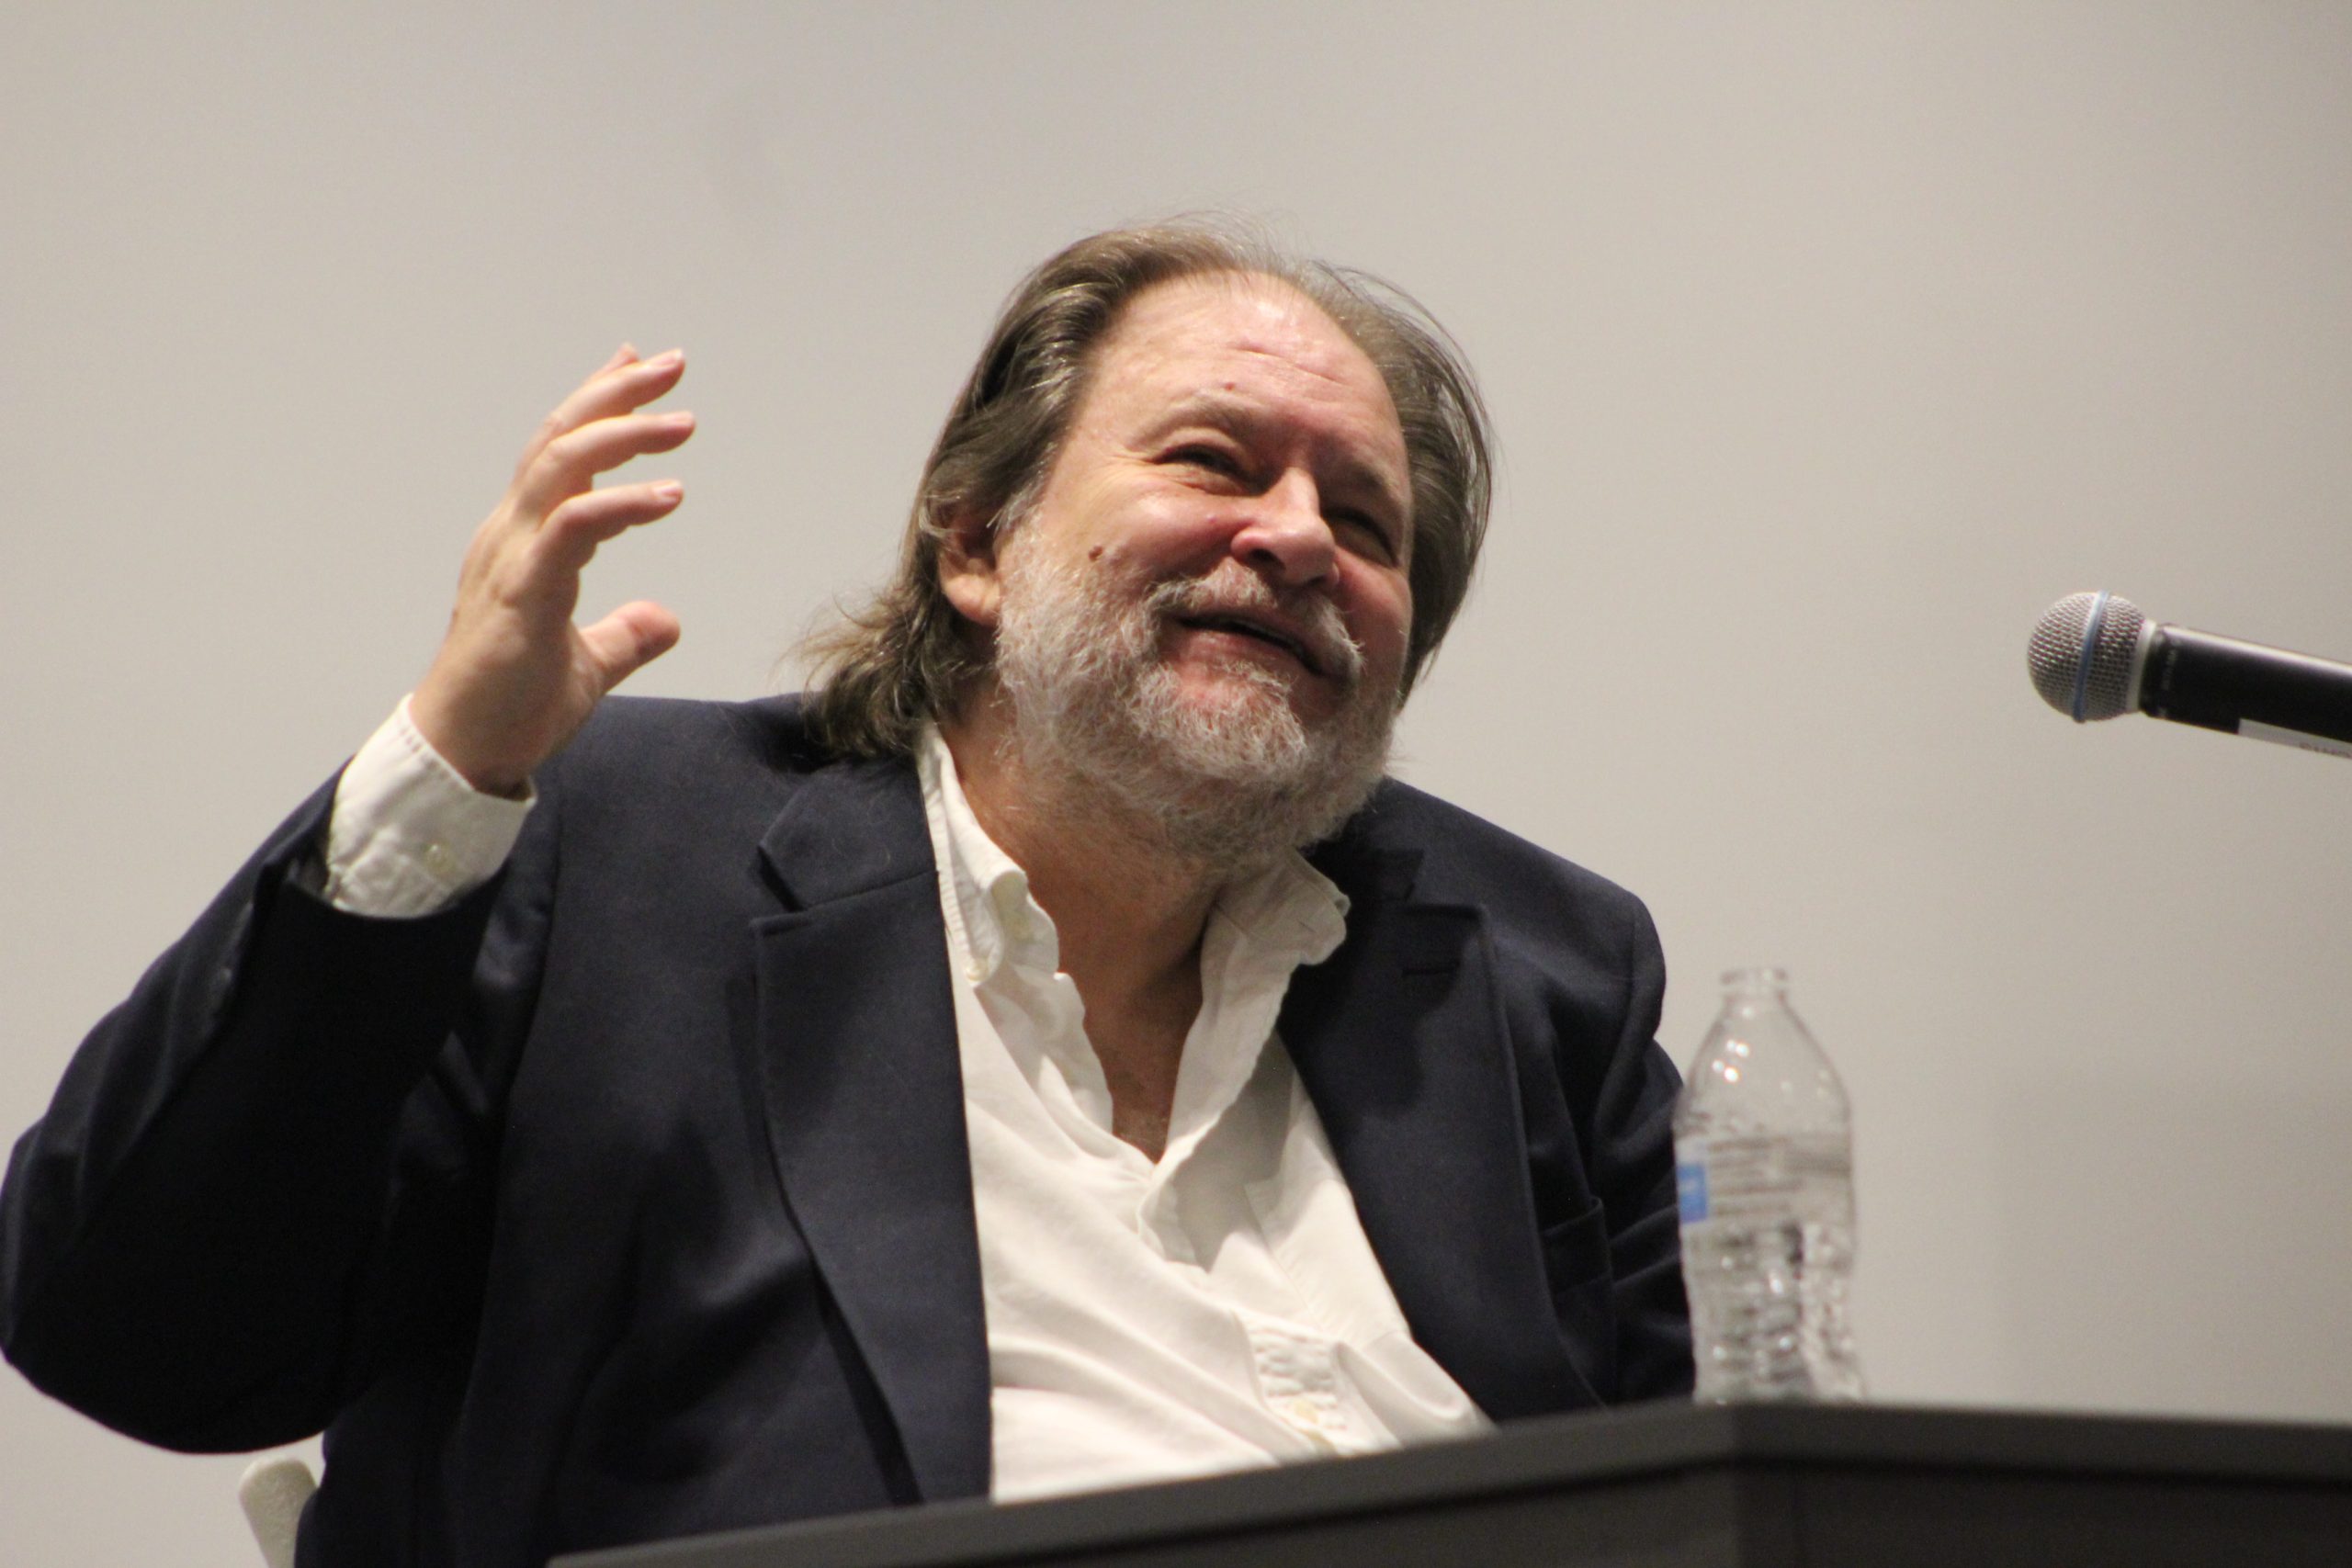 Trussville Public Library hosted Rick Bragg